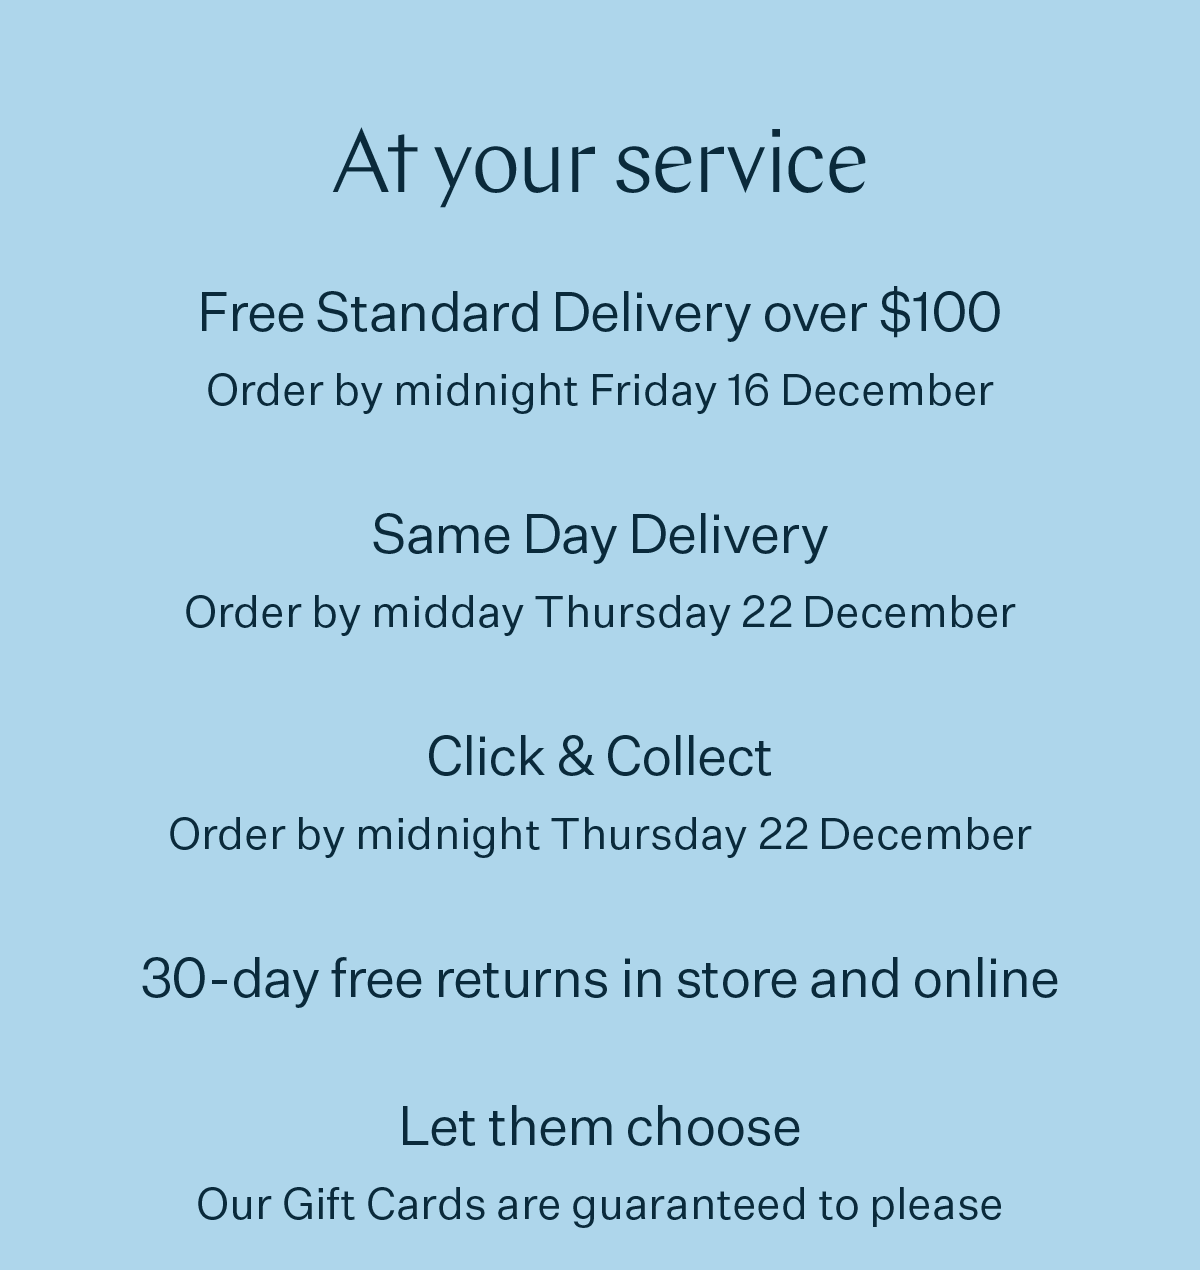 At your service Free Standard Delivery over $100 Order by midnight Friday 16 December Same Day Delivery Order by midday Thursday 22 December Click & Collect Order by midnight Thursday 22 December 30-day free returns in store and online Let them choose Our Gift Cards are guaranteed to please